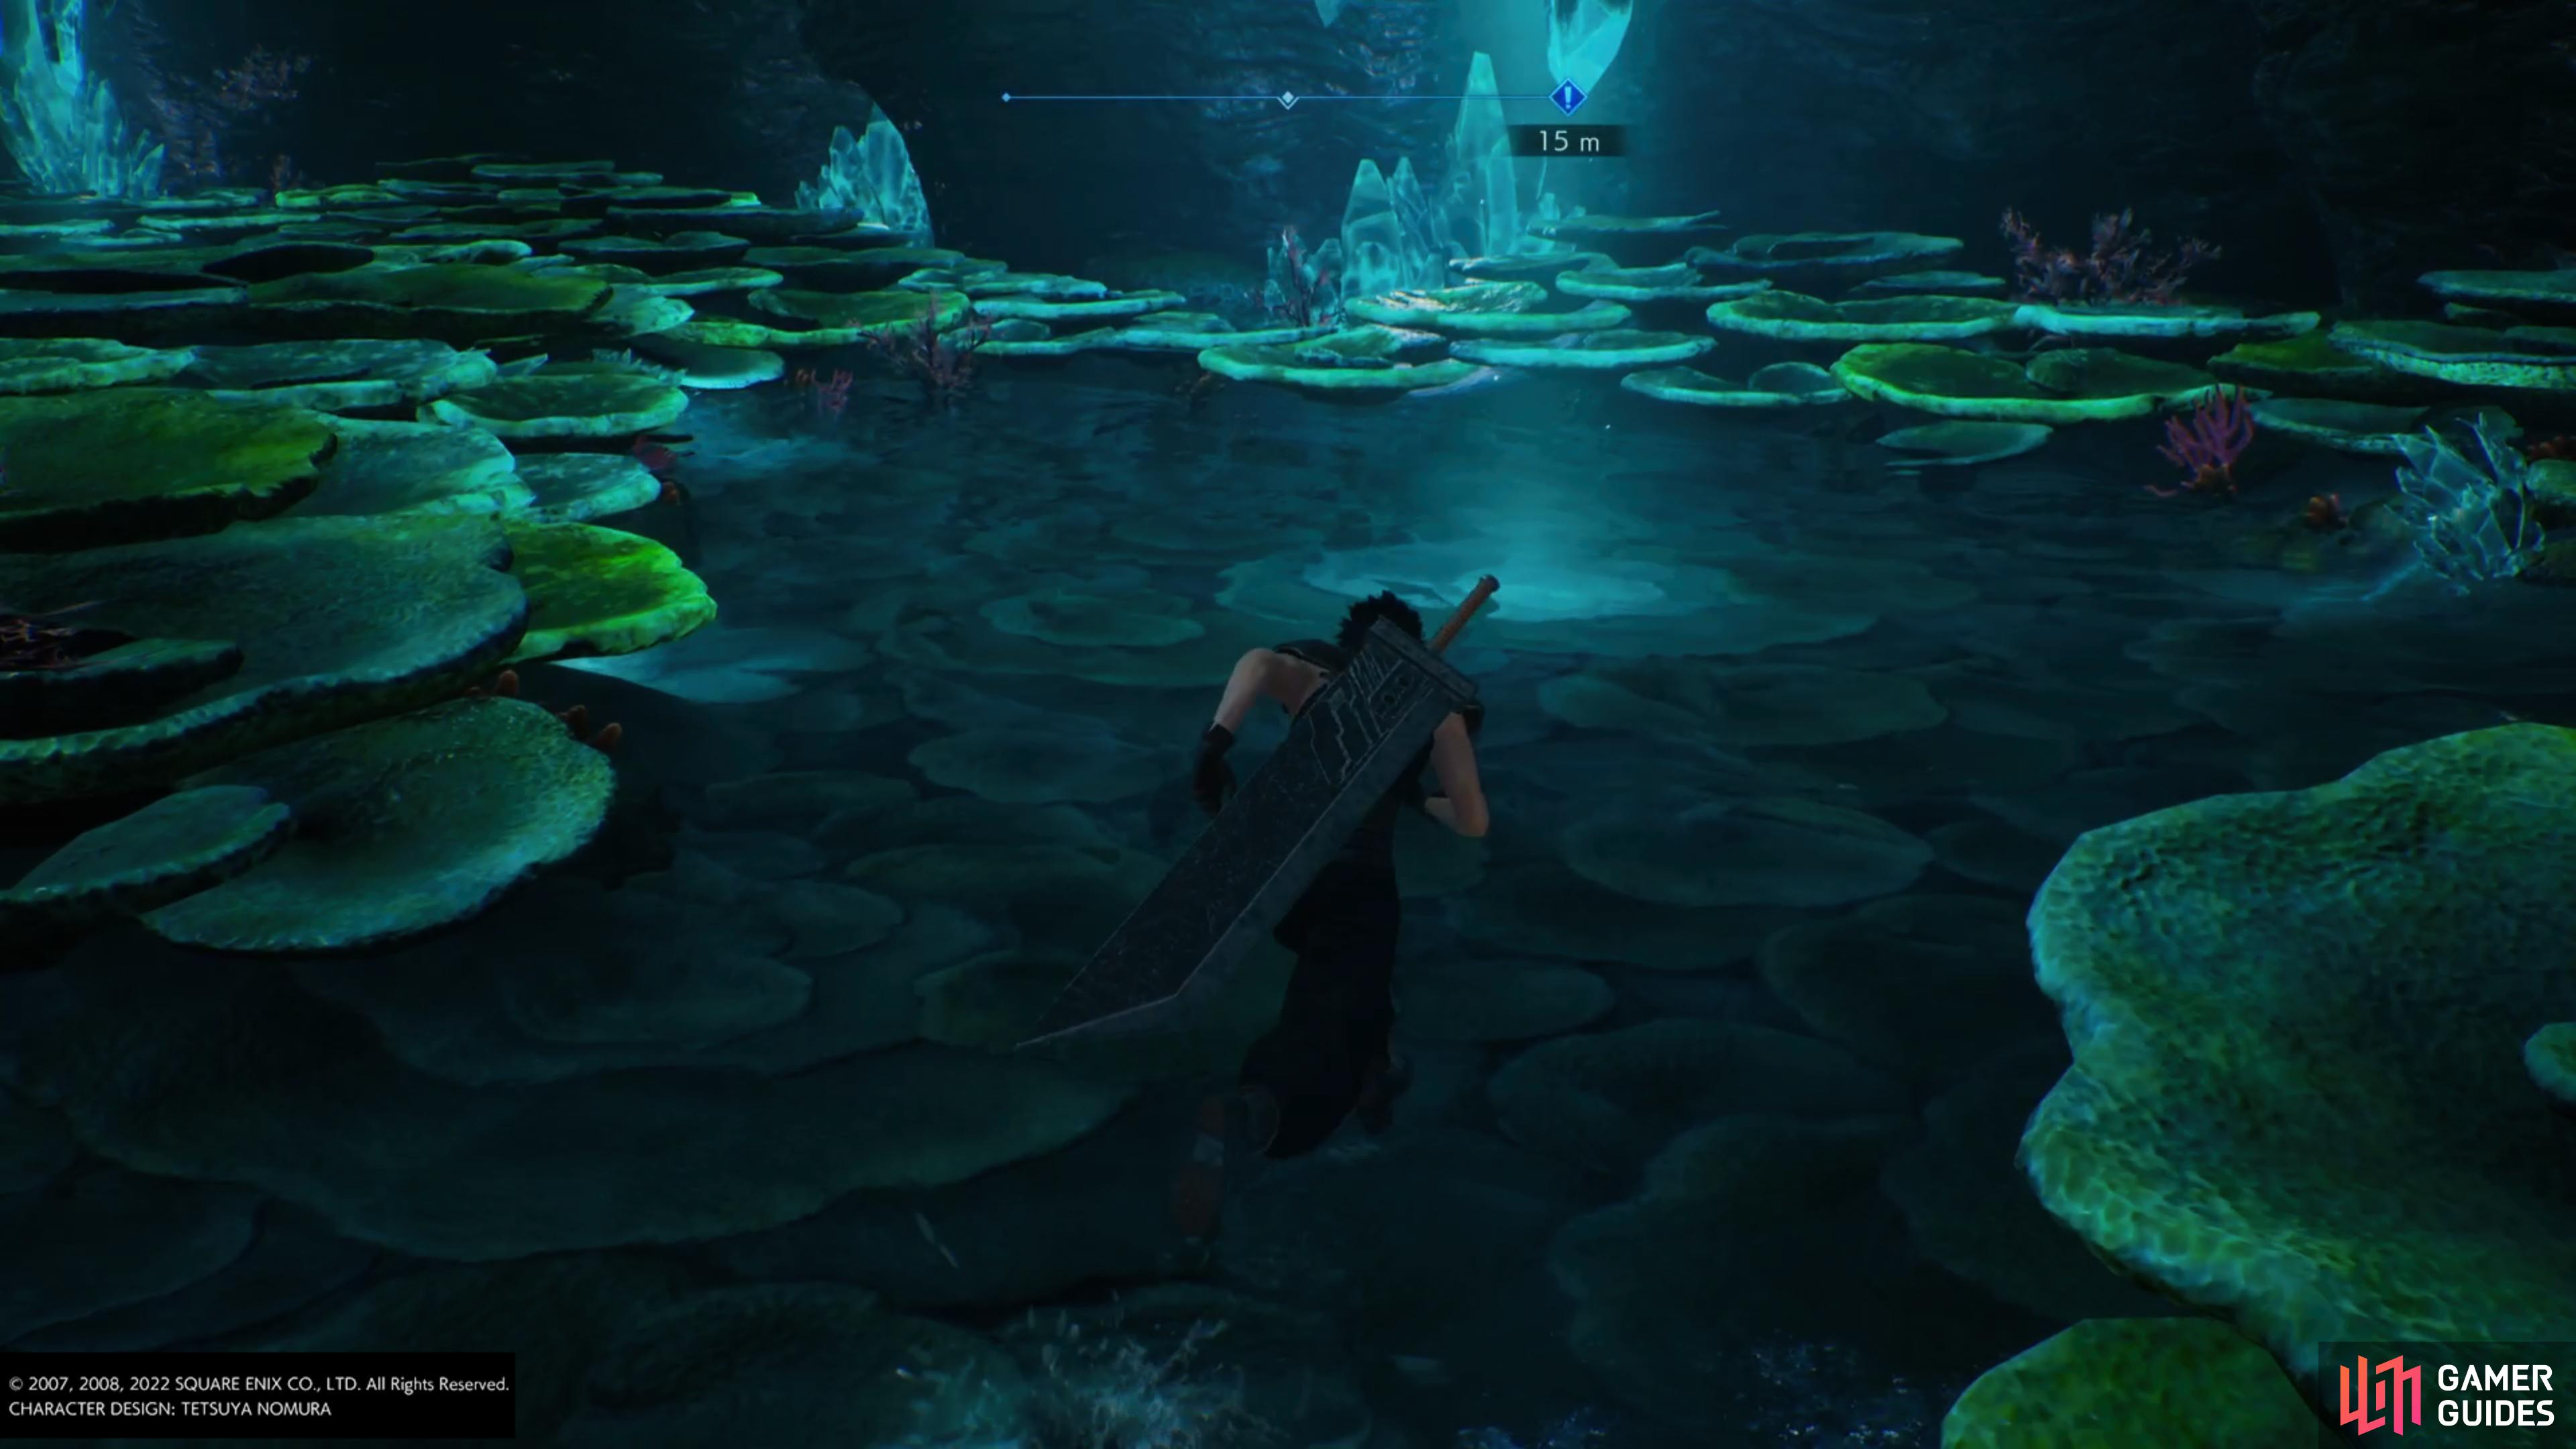 You'll find five crystals in the Lake of Oblivion that you can interact with.